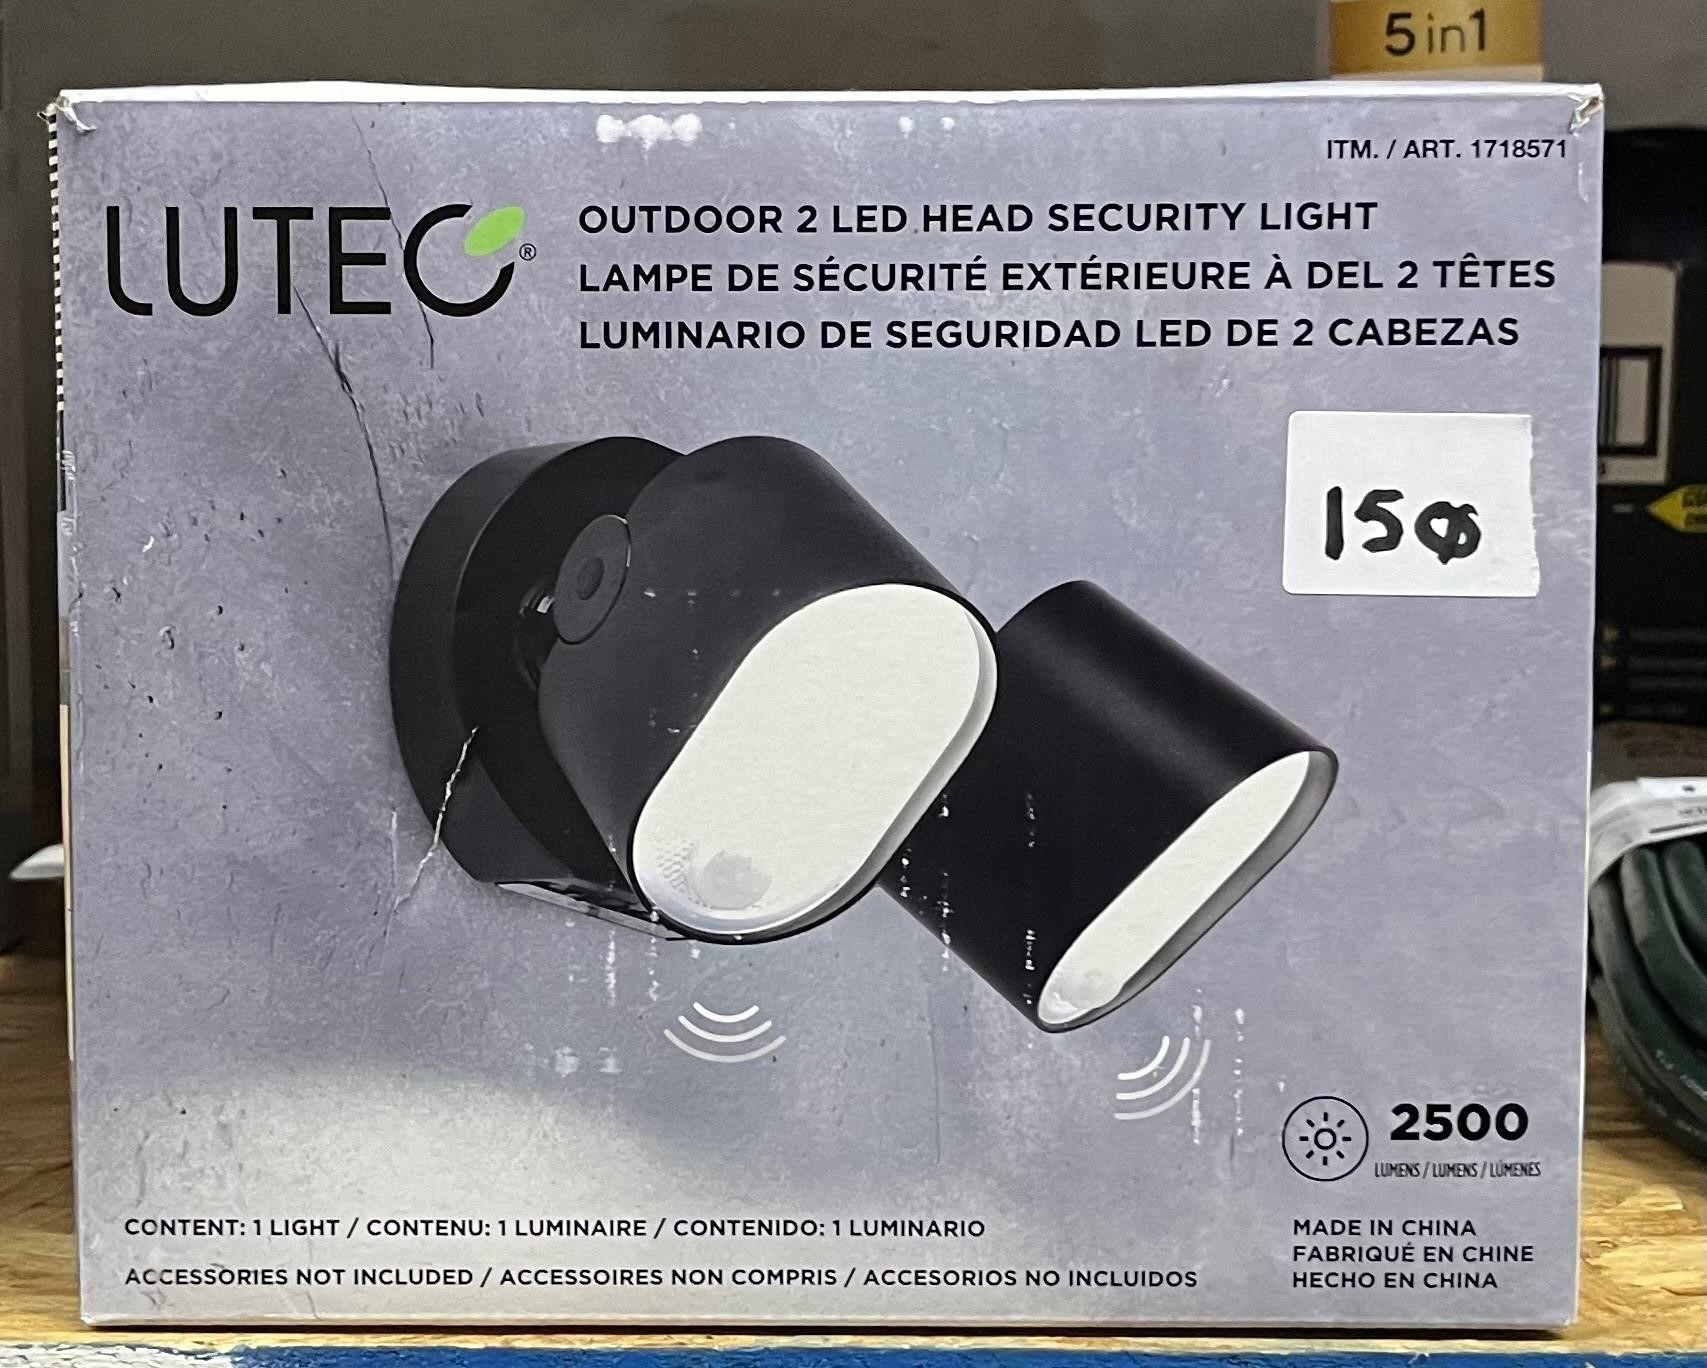 Luteo Outdoor 2 LED Head Security Light